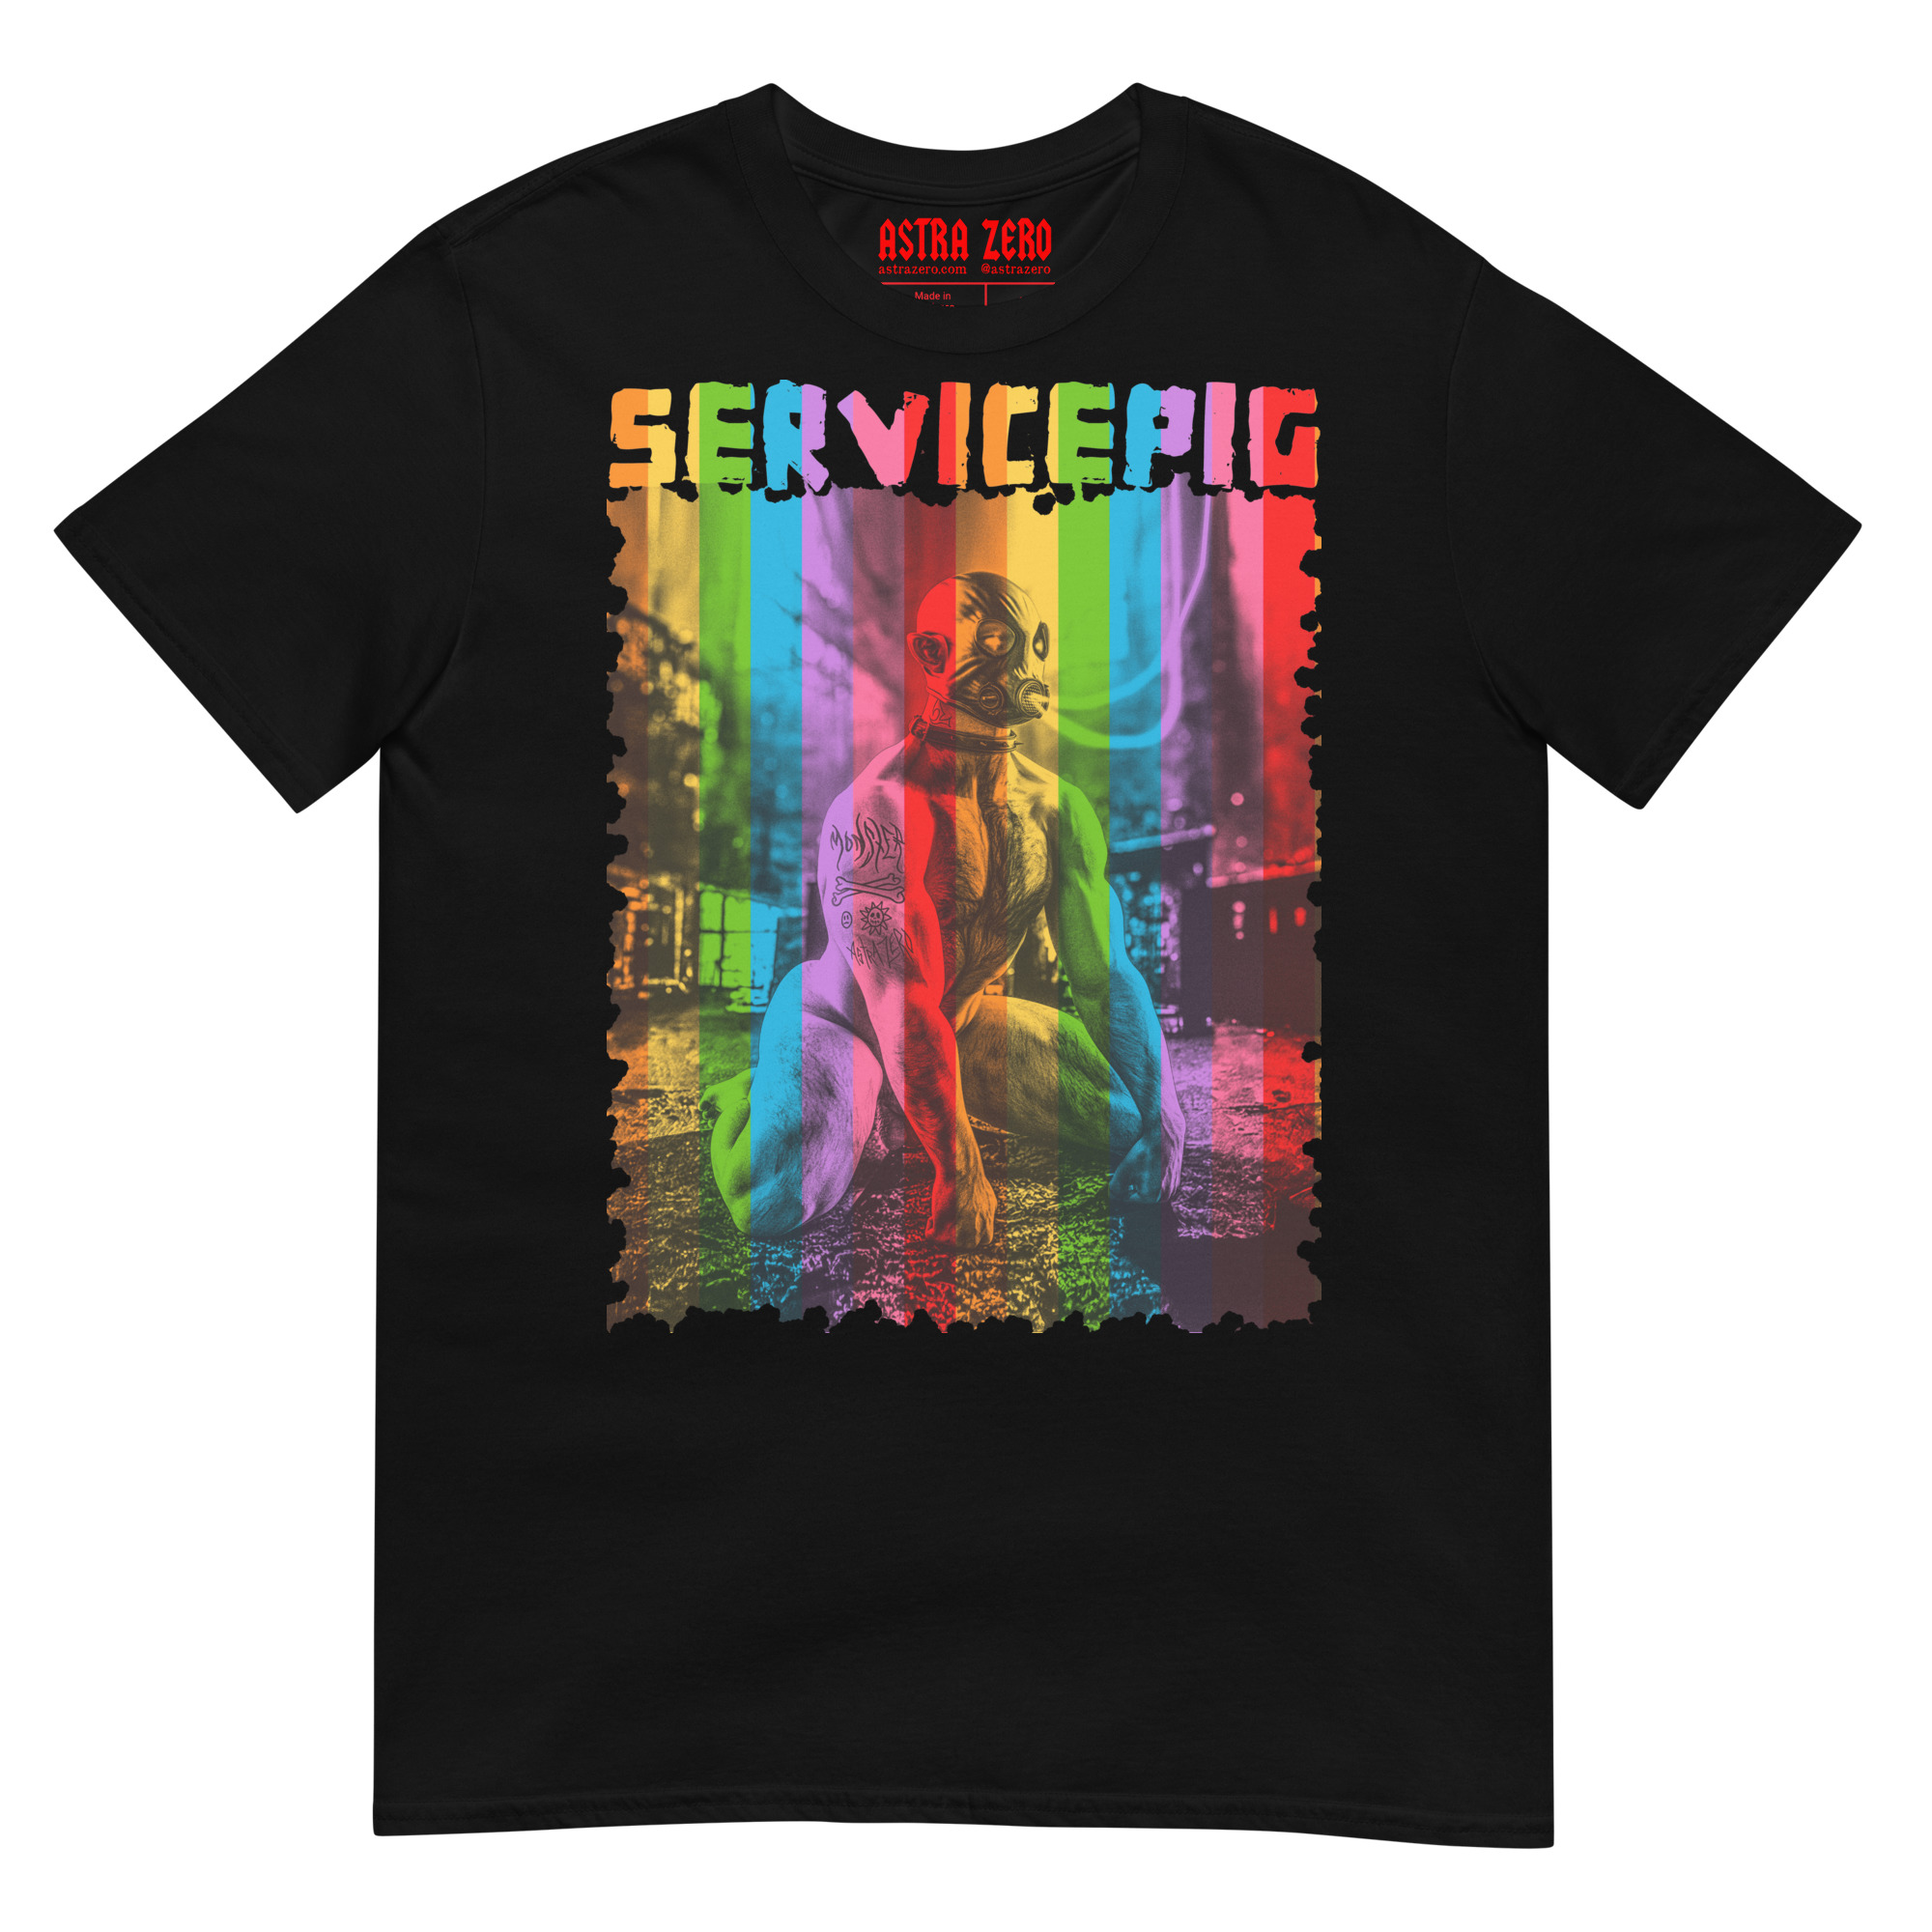 Featured image for “Service Pig Gay Pride - Short-Sleeve Unisex T-Shirt”